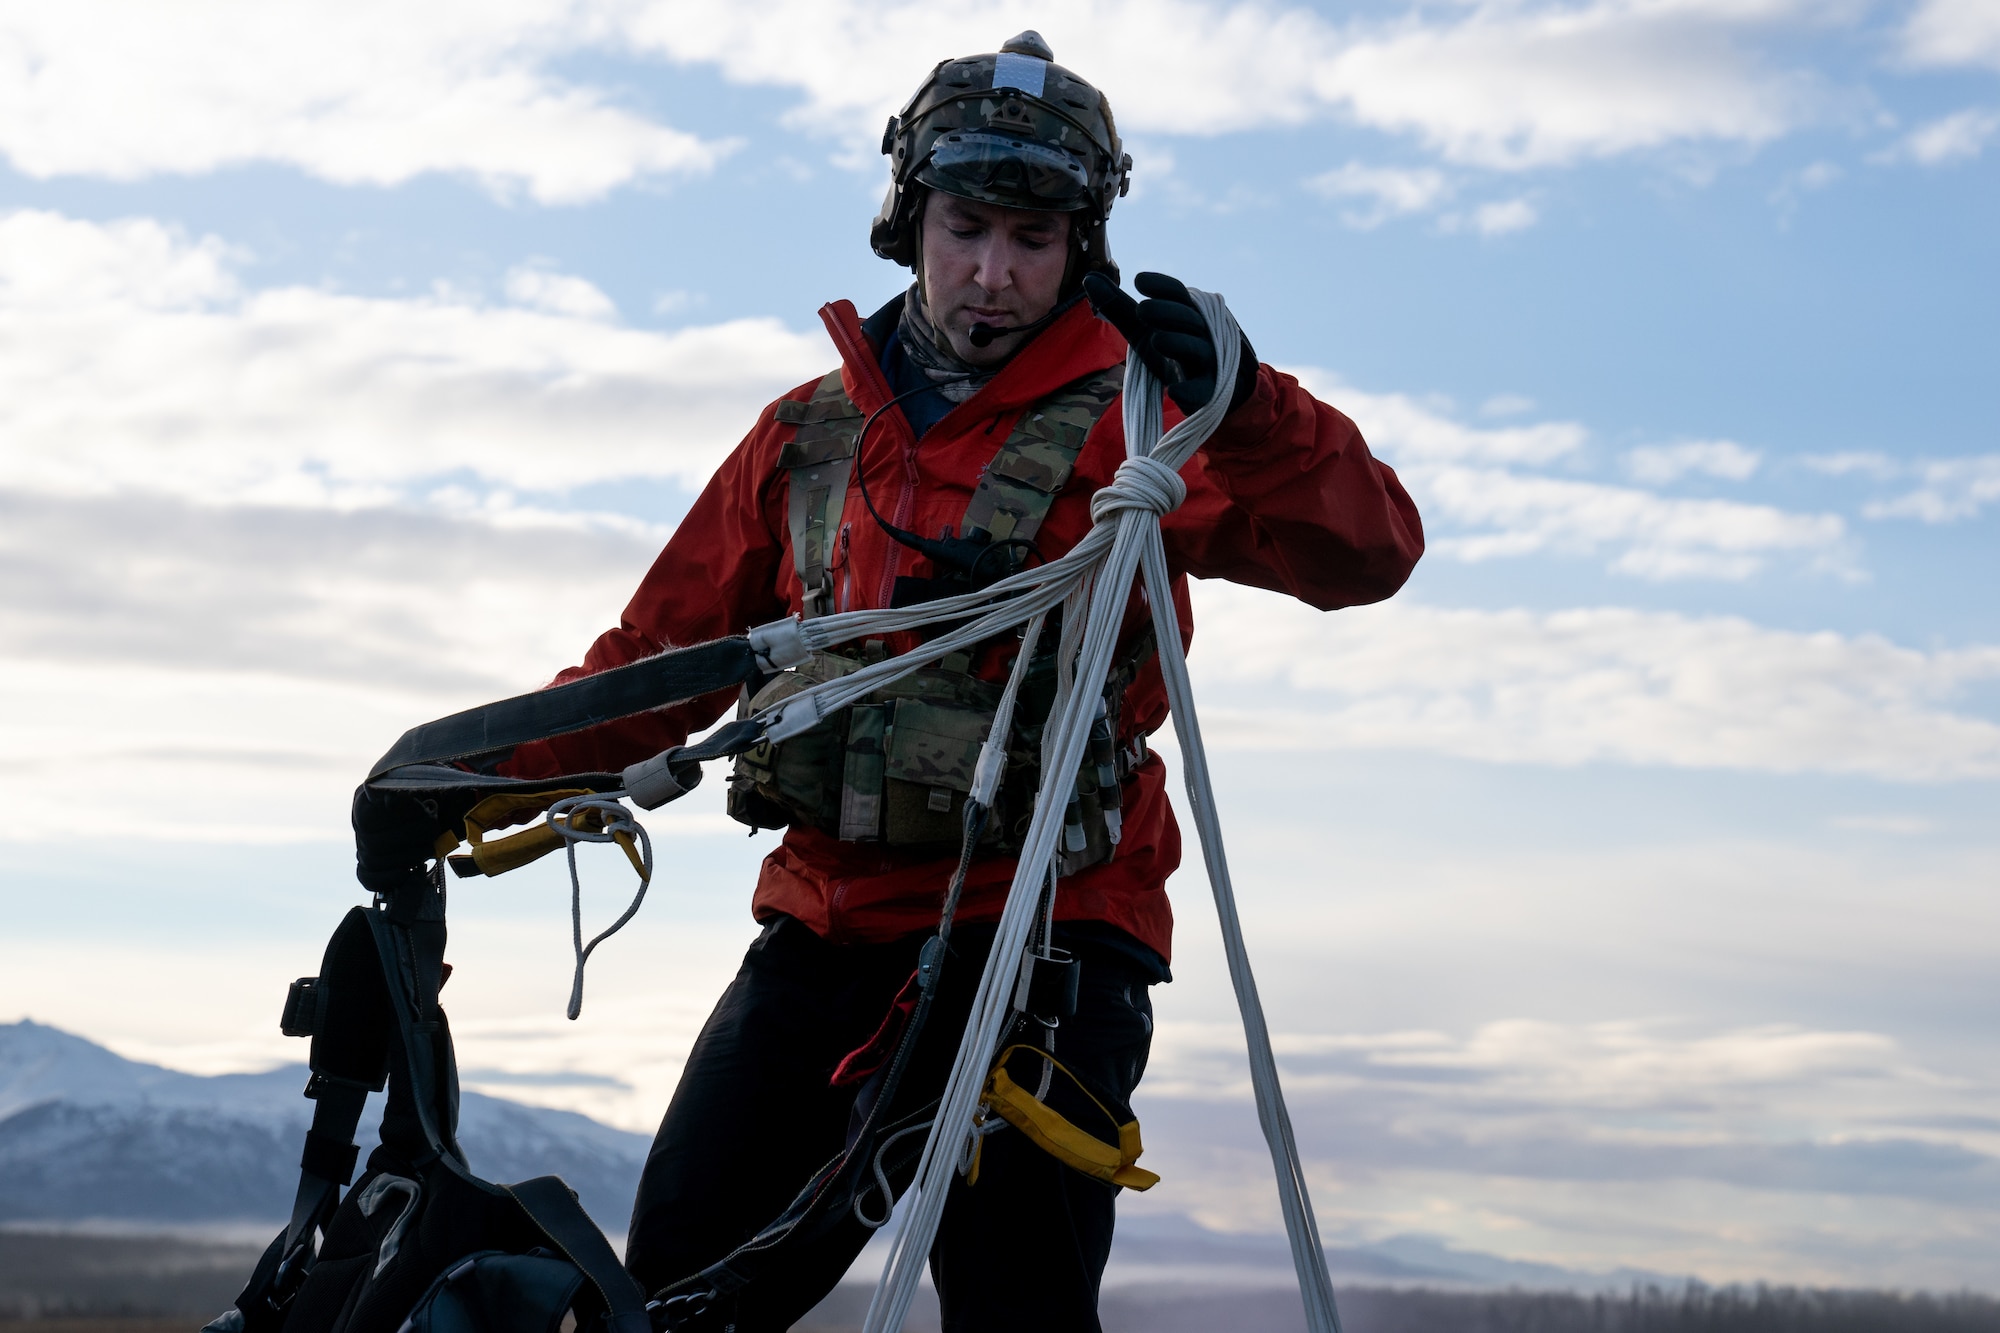 U.S. Air Force Master Sgt. Dan Lutz, a pararescueman assigned to the 212th Rescue Squadron, Alaska Air National Guard, recovers a parachute after a successful jump during a training event Joint Base Elmendorf-Richardson.